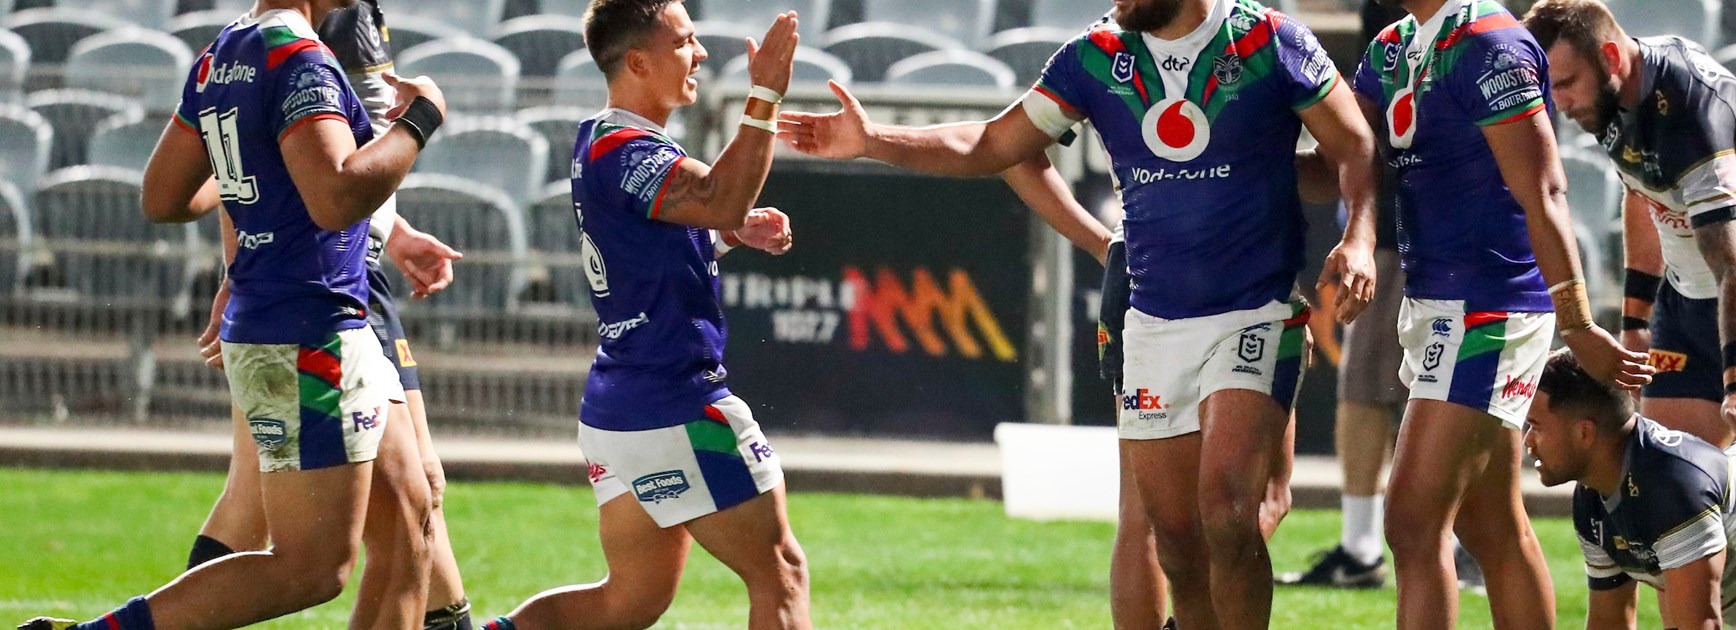 Round 5 Snapshot + Dally M votes: New leader in award race